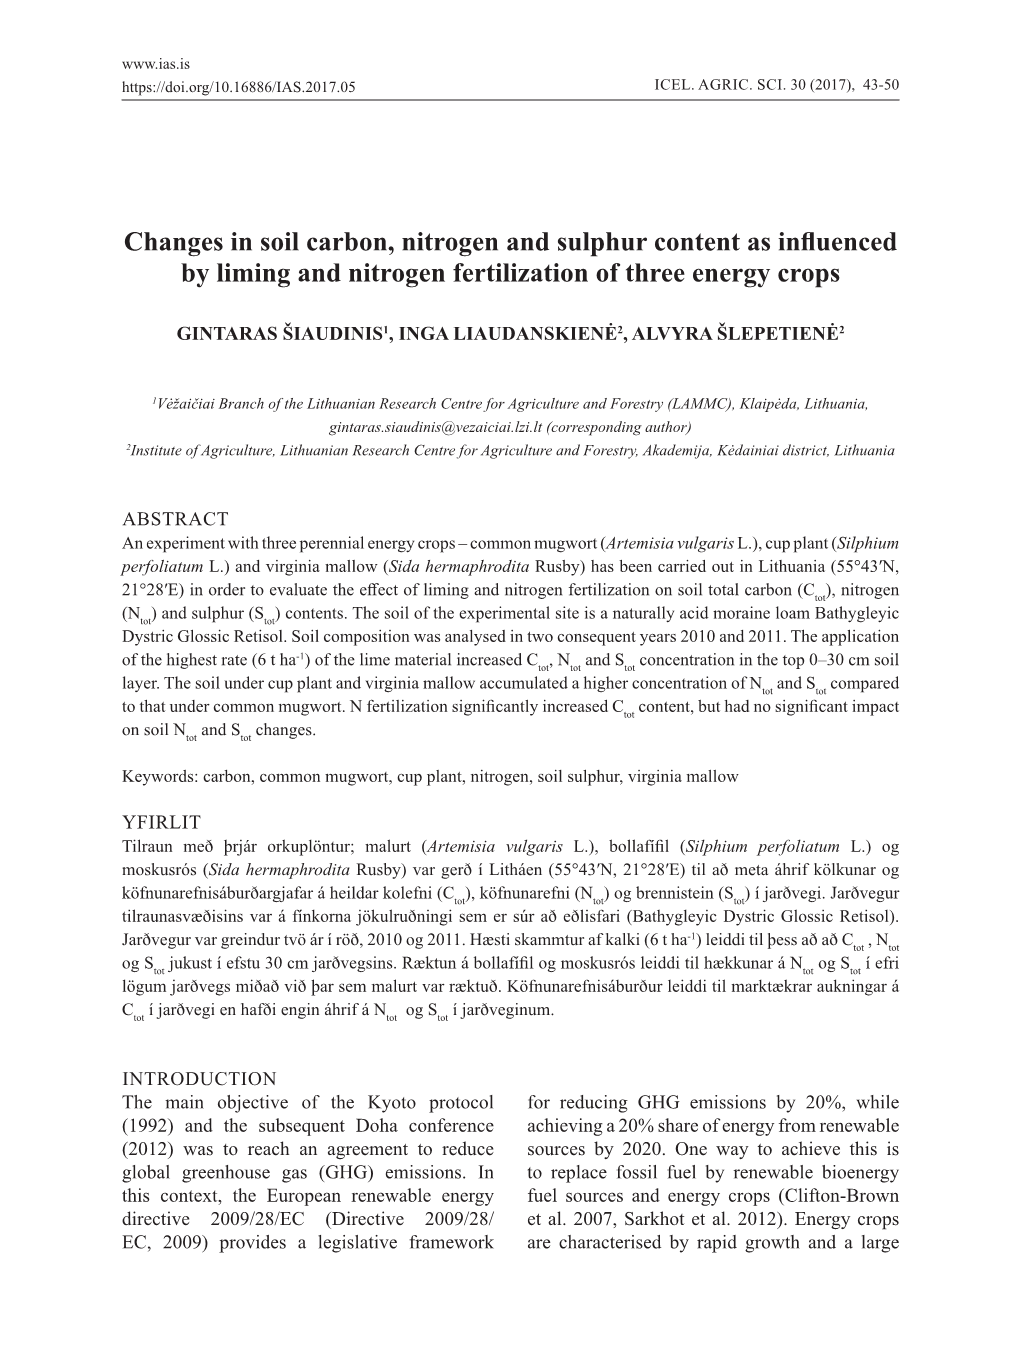 Changes in Soil Carbon, Nitrogen and Sulphur Content As Influenced by Liming and Nitrogen Fertilization of Three Energy Crops